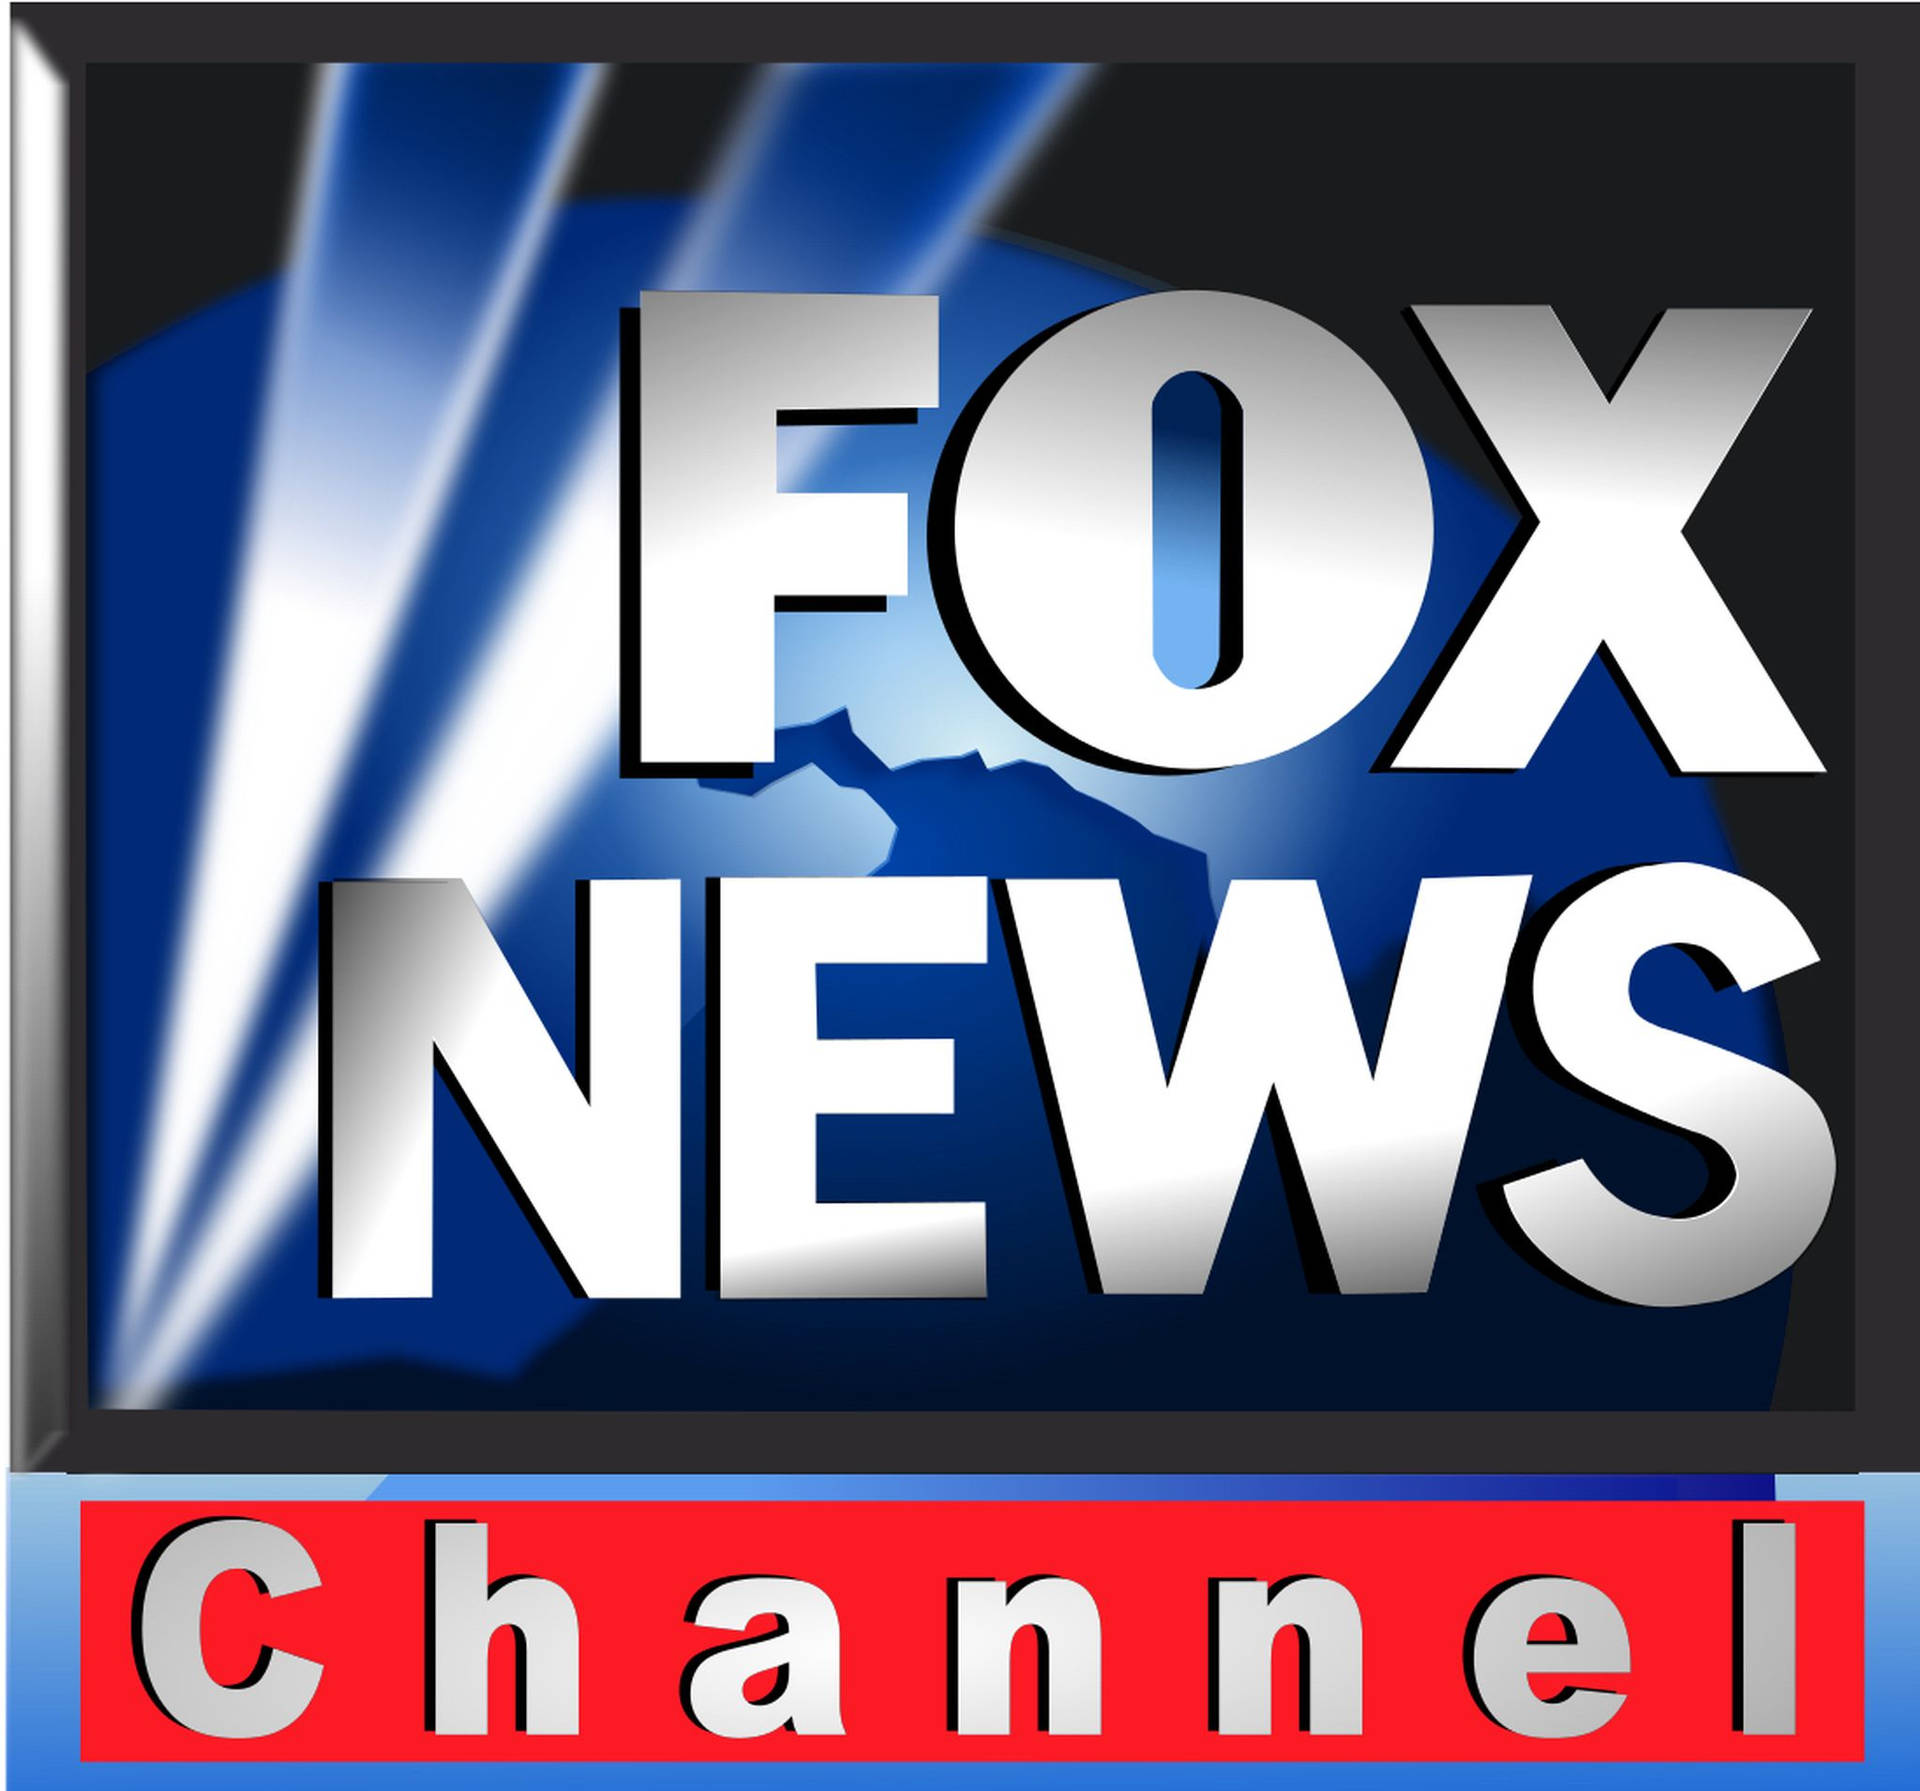 Foxnews Channel Is A Conservative News Channel In The United States. Fondo de pantalla